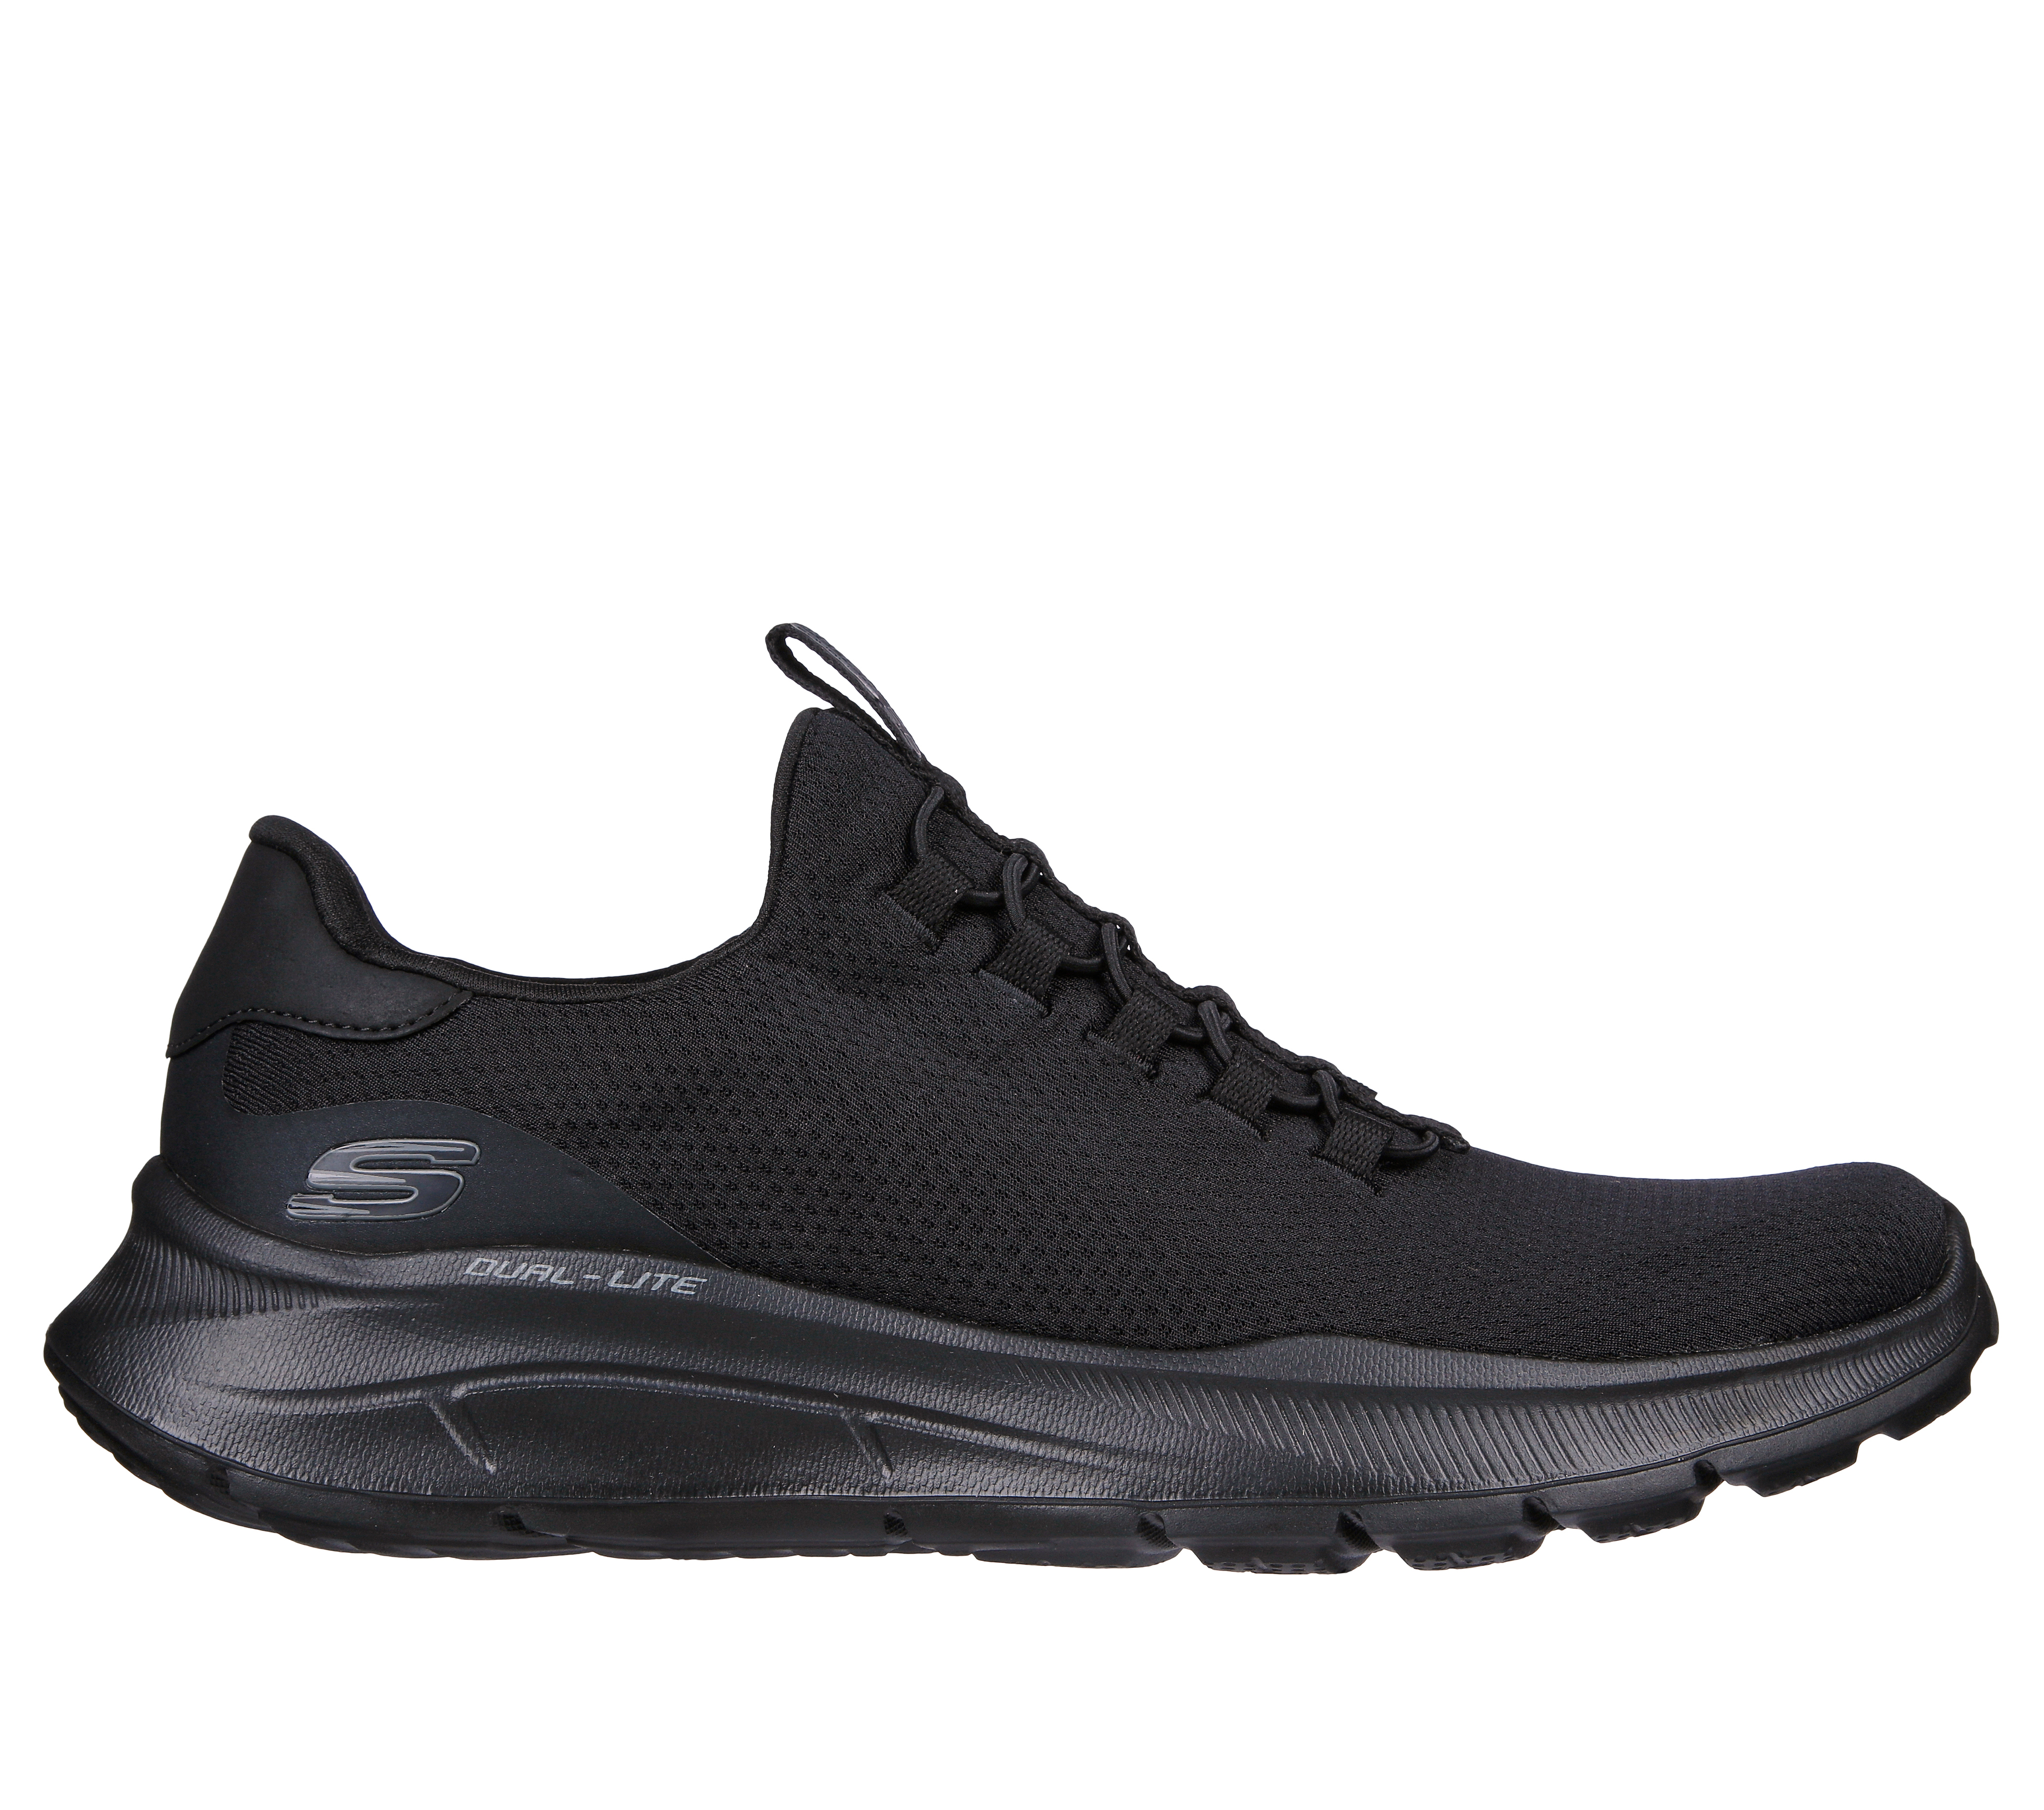 - Lemba Relaxed | Equalizer 5.0 SKECHERS Fit: